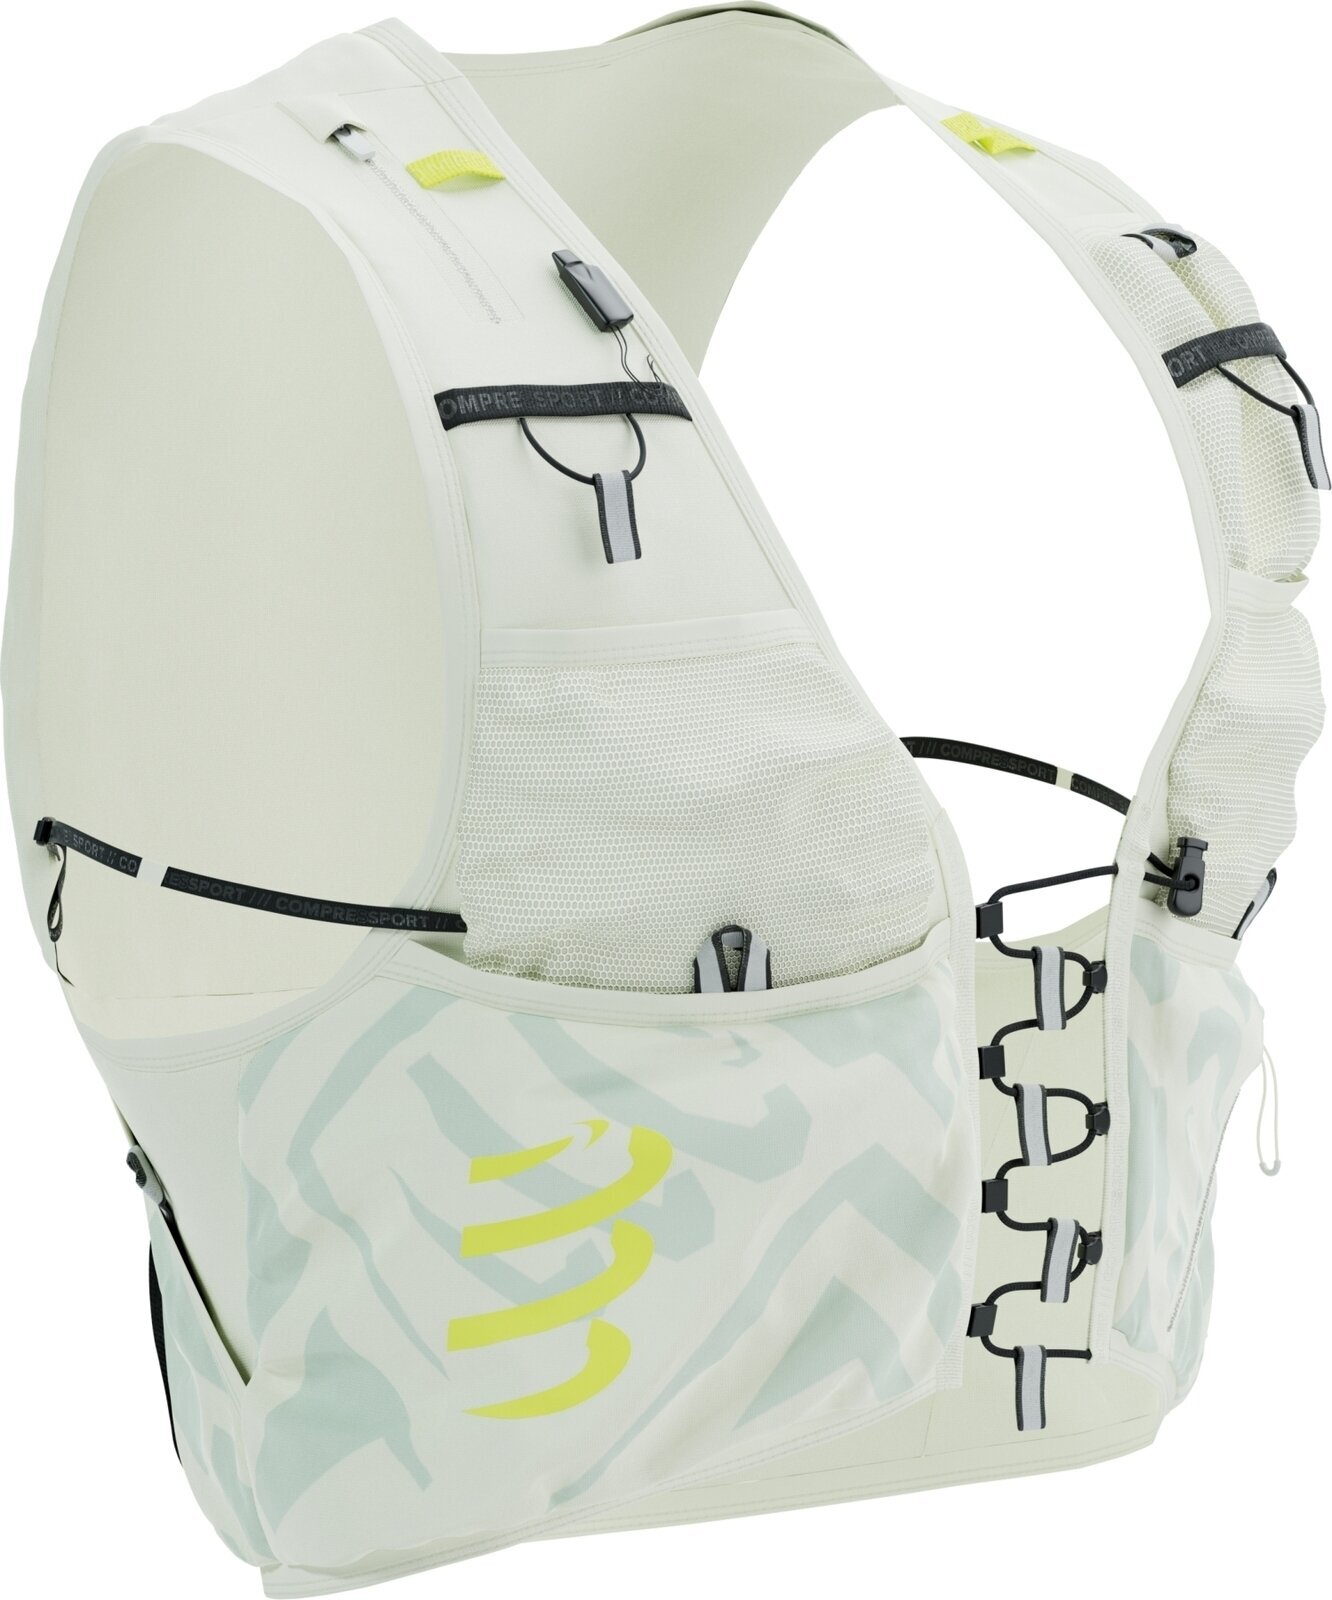 Running backpack Compressport UltRun S Pack Evo 10 Sugar Swizzle/Ice Flow/Safety Yellow XS Running backpack